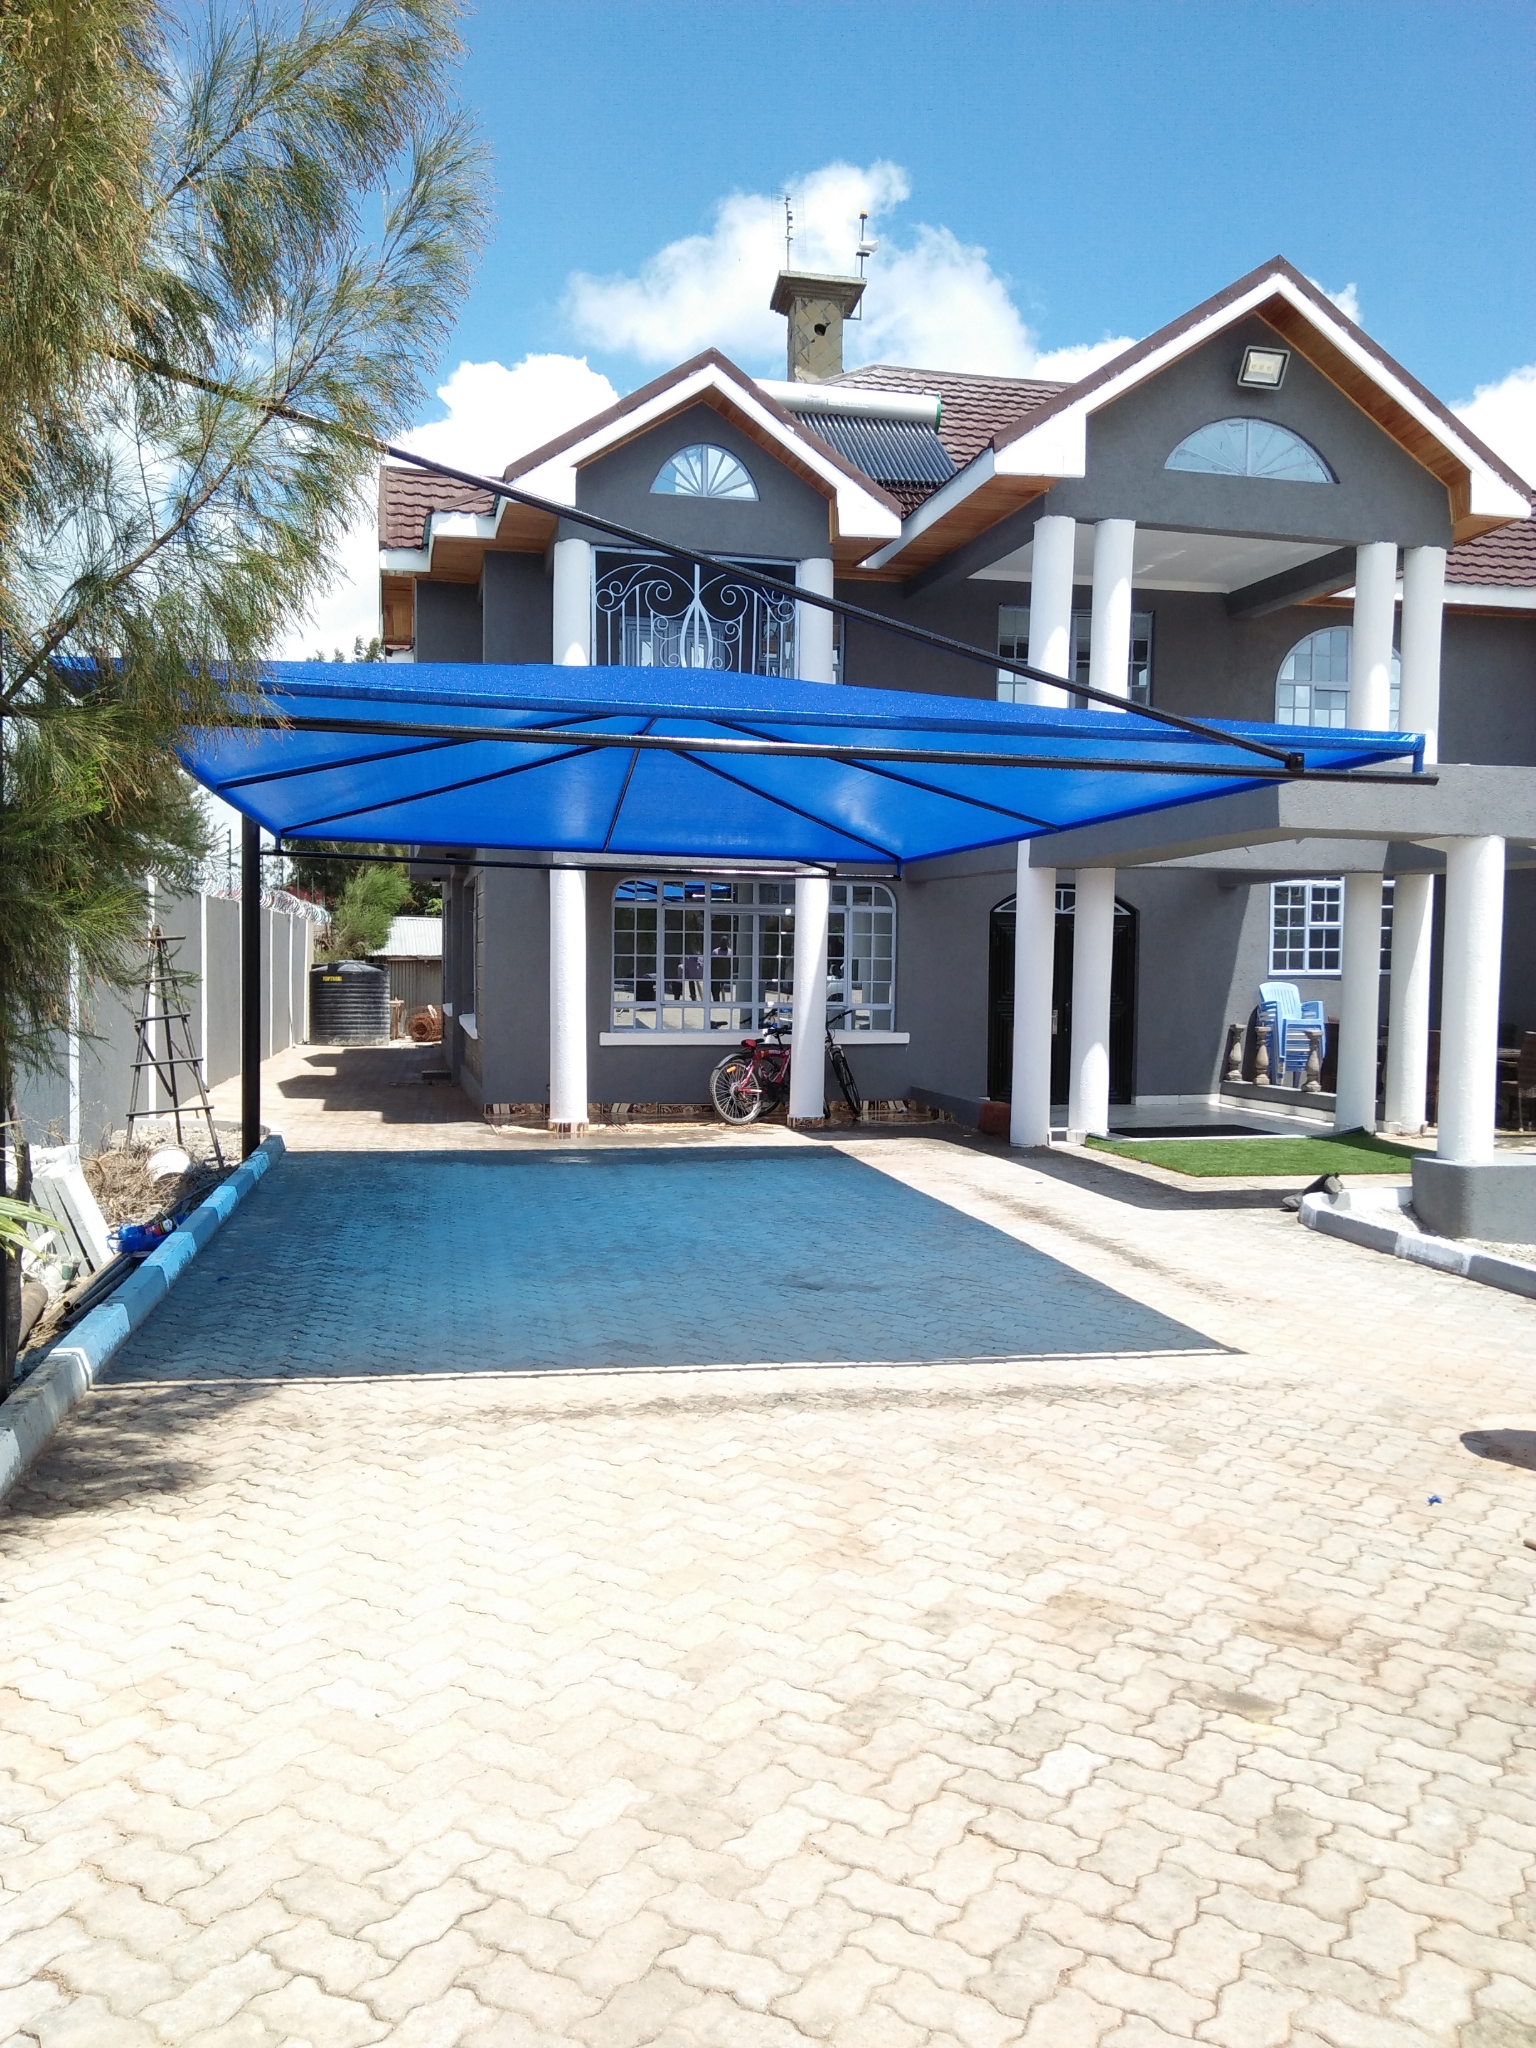 THE BEST AND MOST DURABLE PARKING SHADES IN KENYA